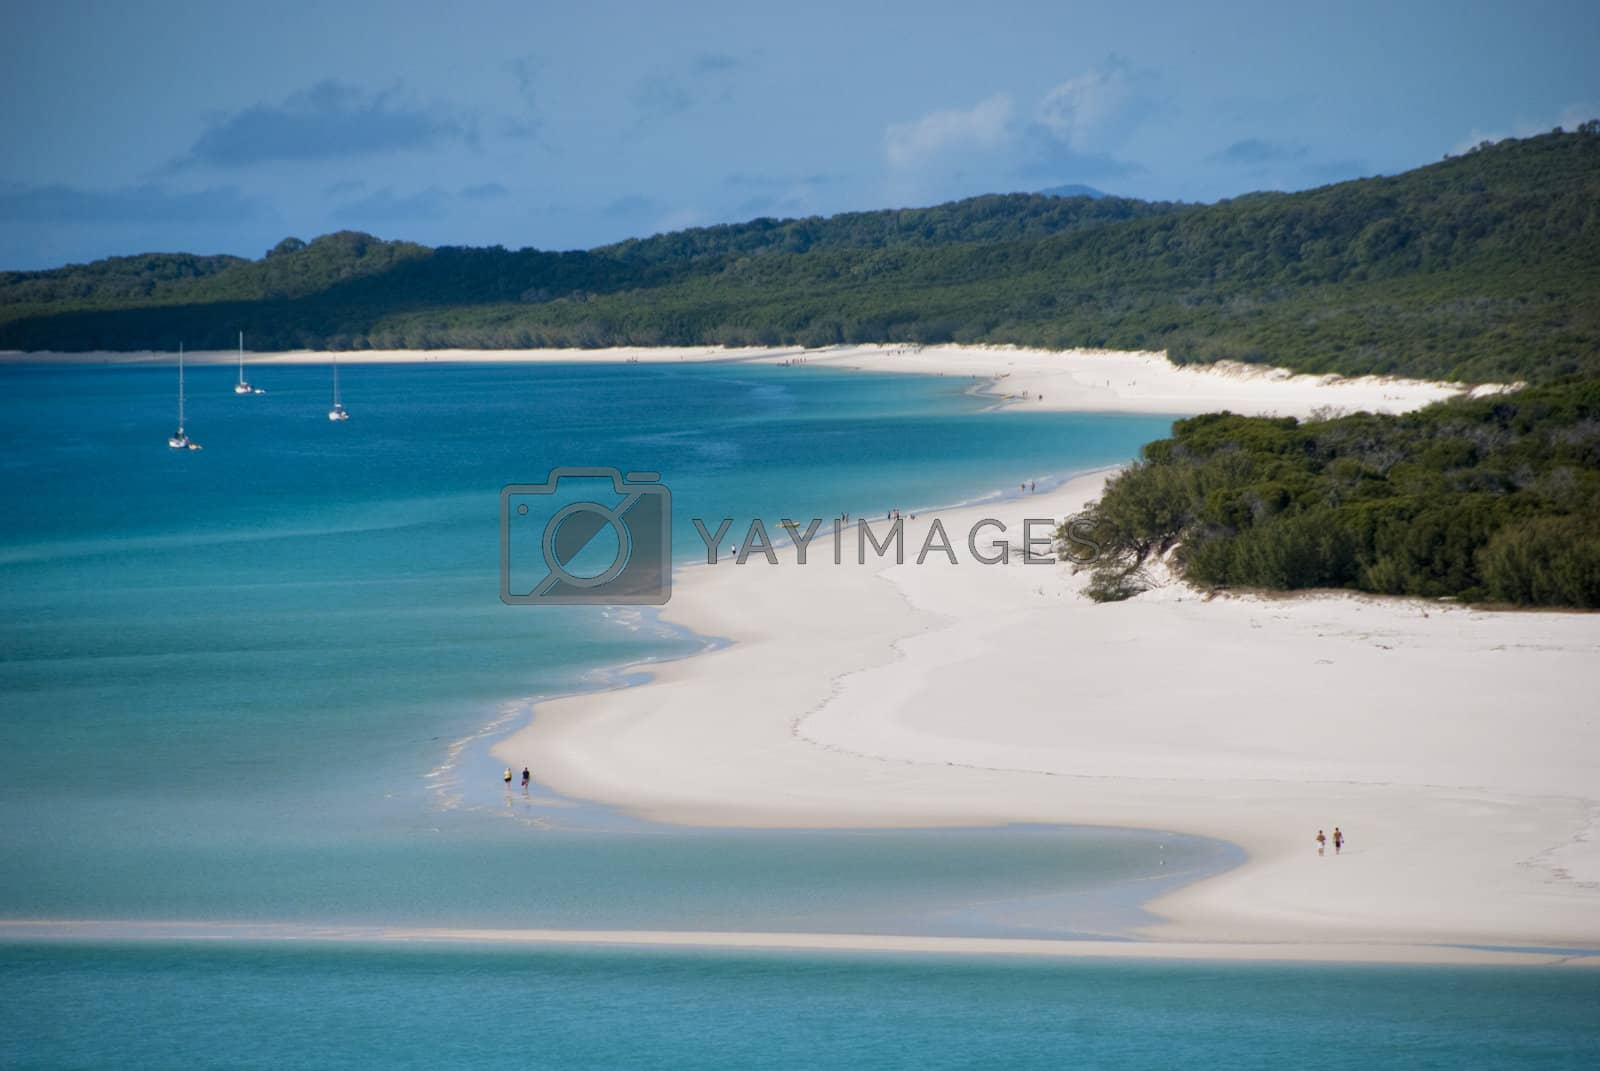 Royalty free image of Whitehaven Beach Bay, Queensland, Australia, August 2009 by jovannig